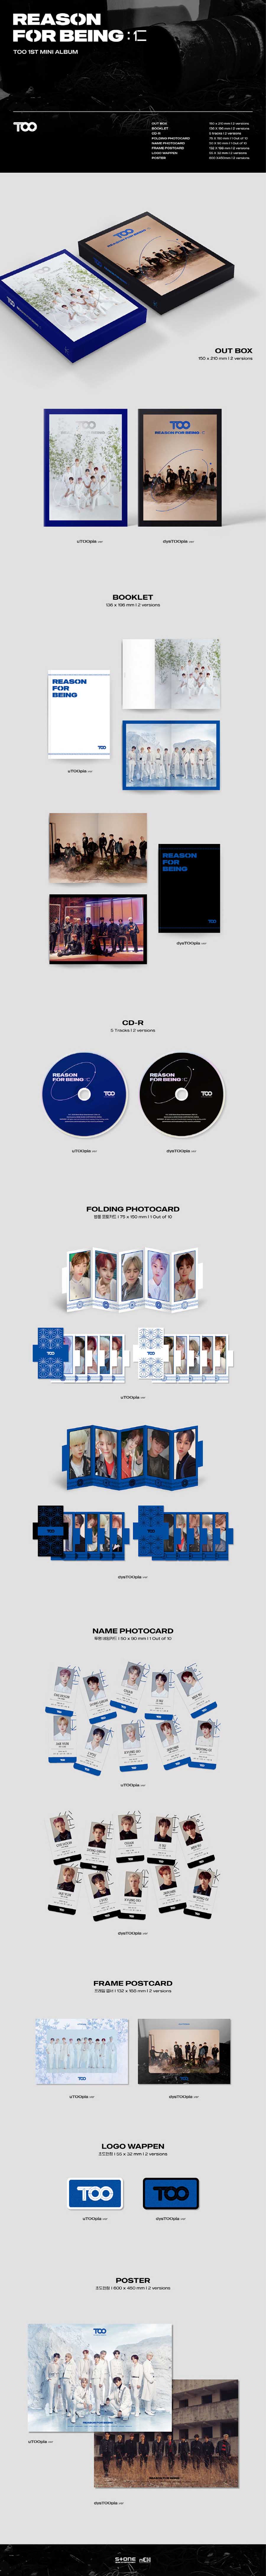 too-1st-mini-album-reason-for-being-in-wholesale